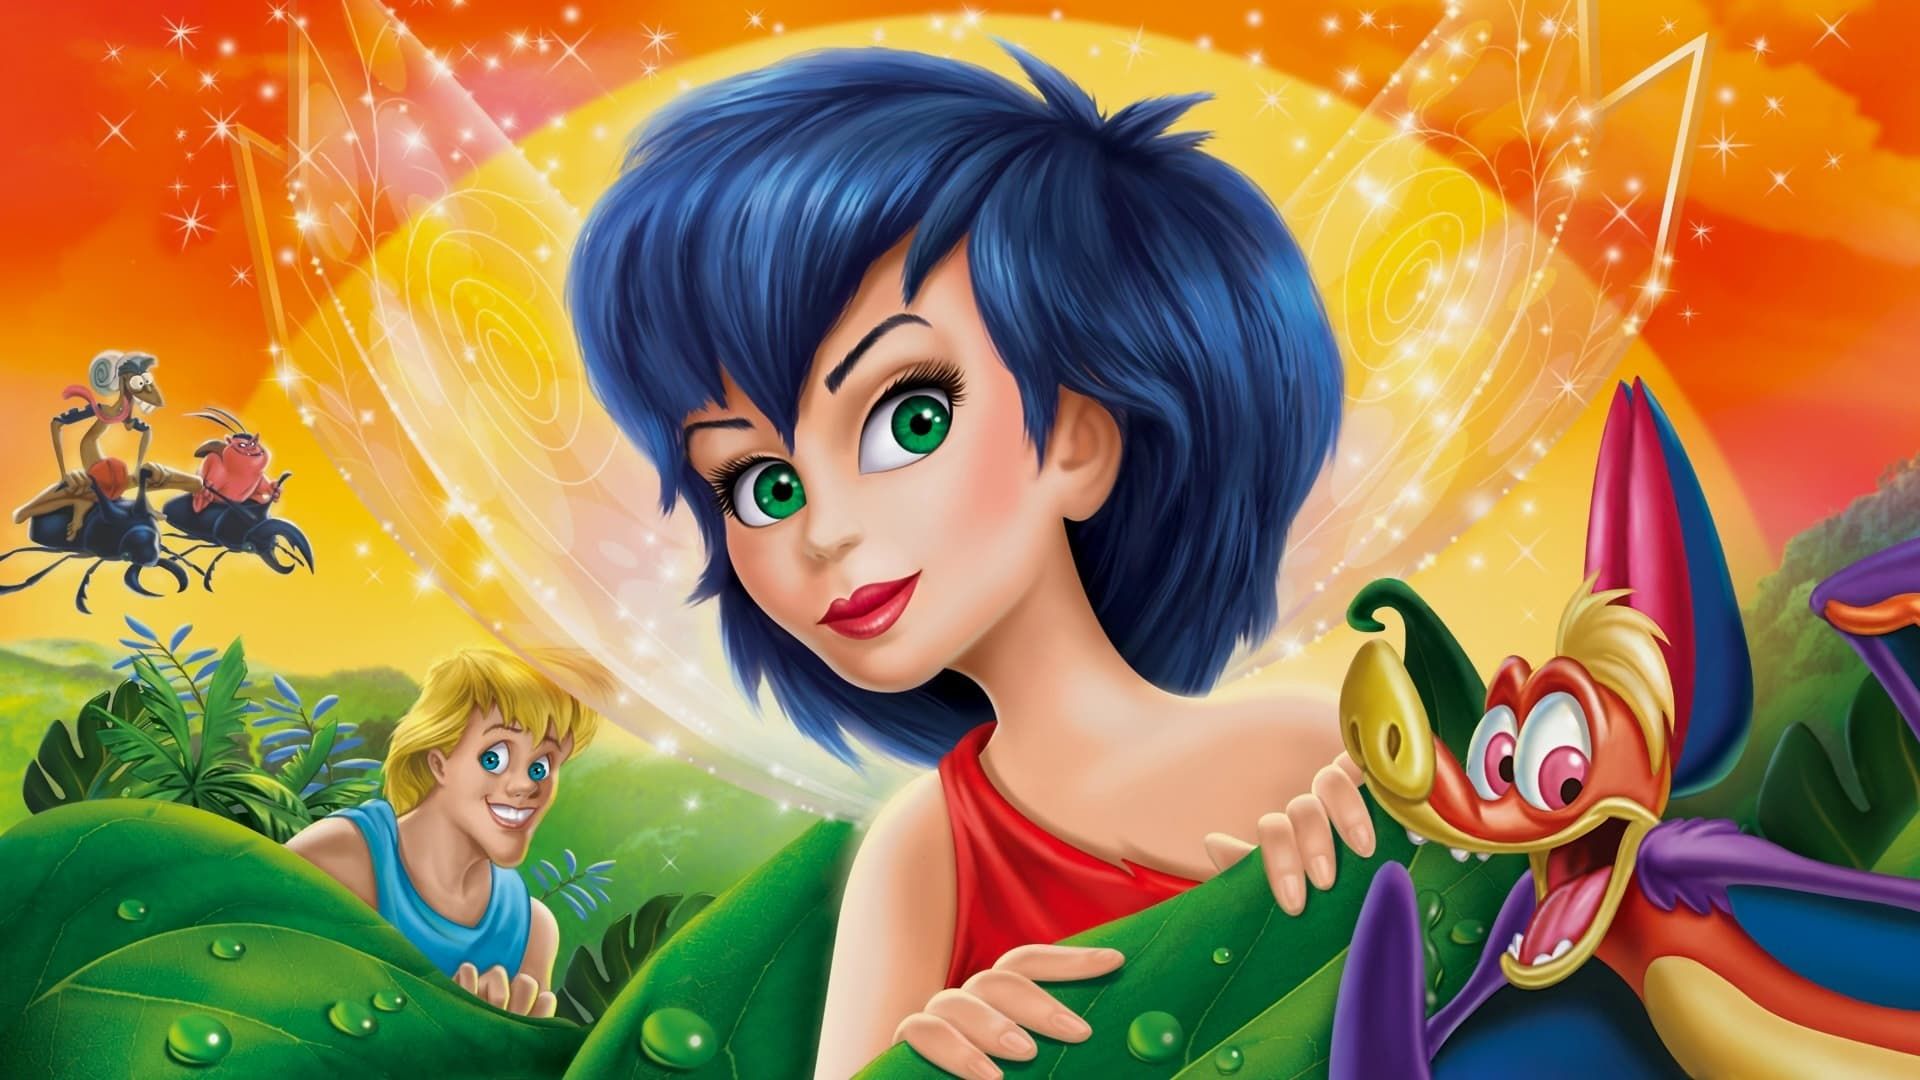 FernGully: The Last Rainforest Backdrop